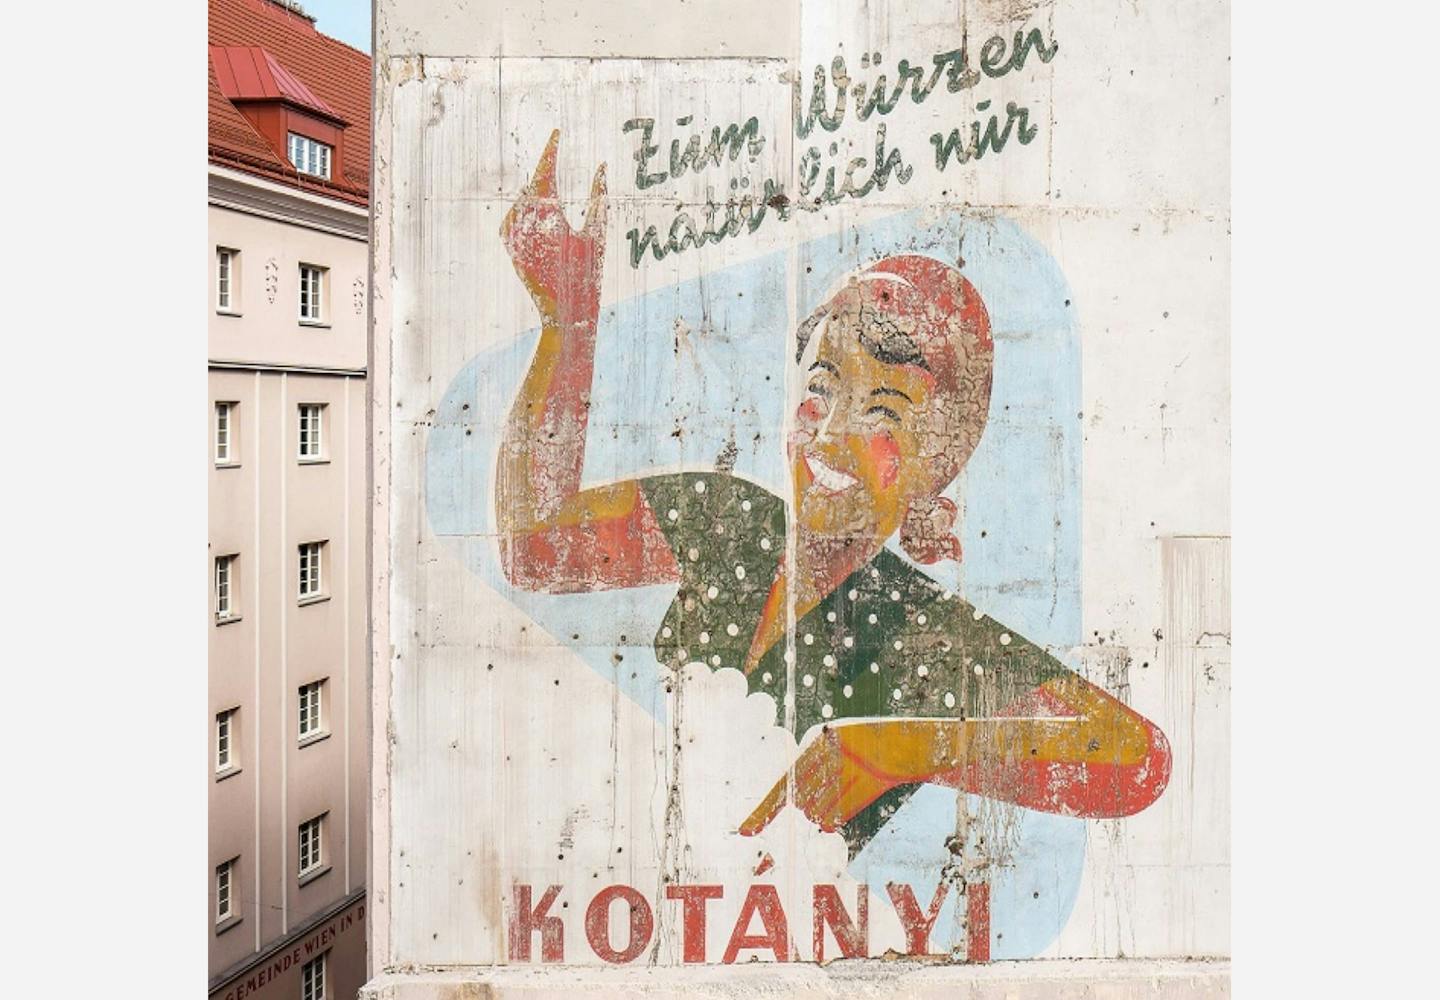 The outside of a Viennese building featuring Kotányi advertising.